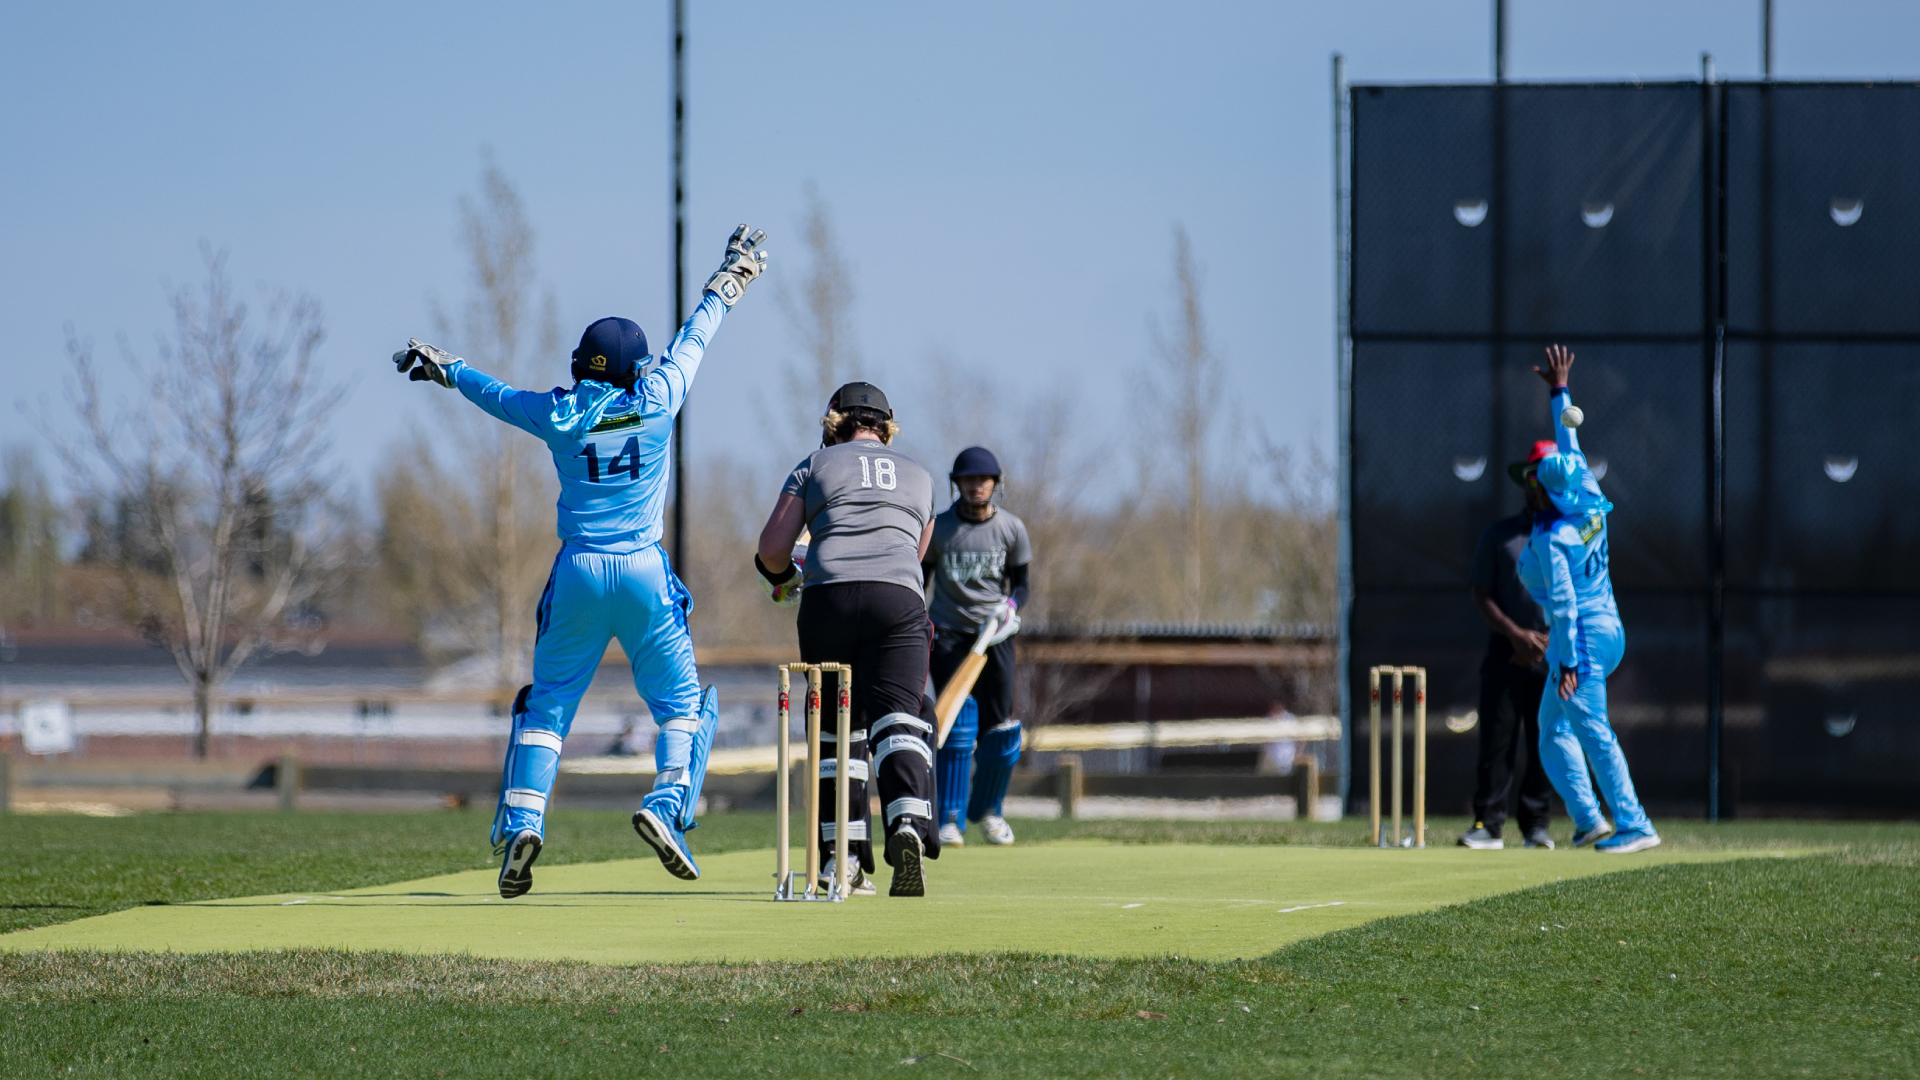 Women's Cricket Huskies host Strikers in inaugural matches